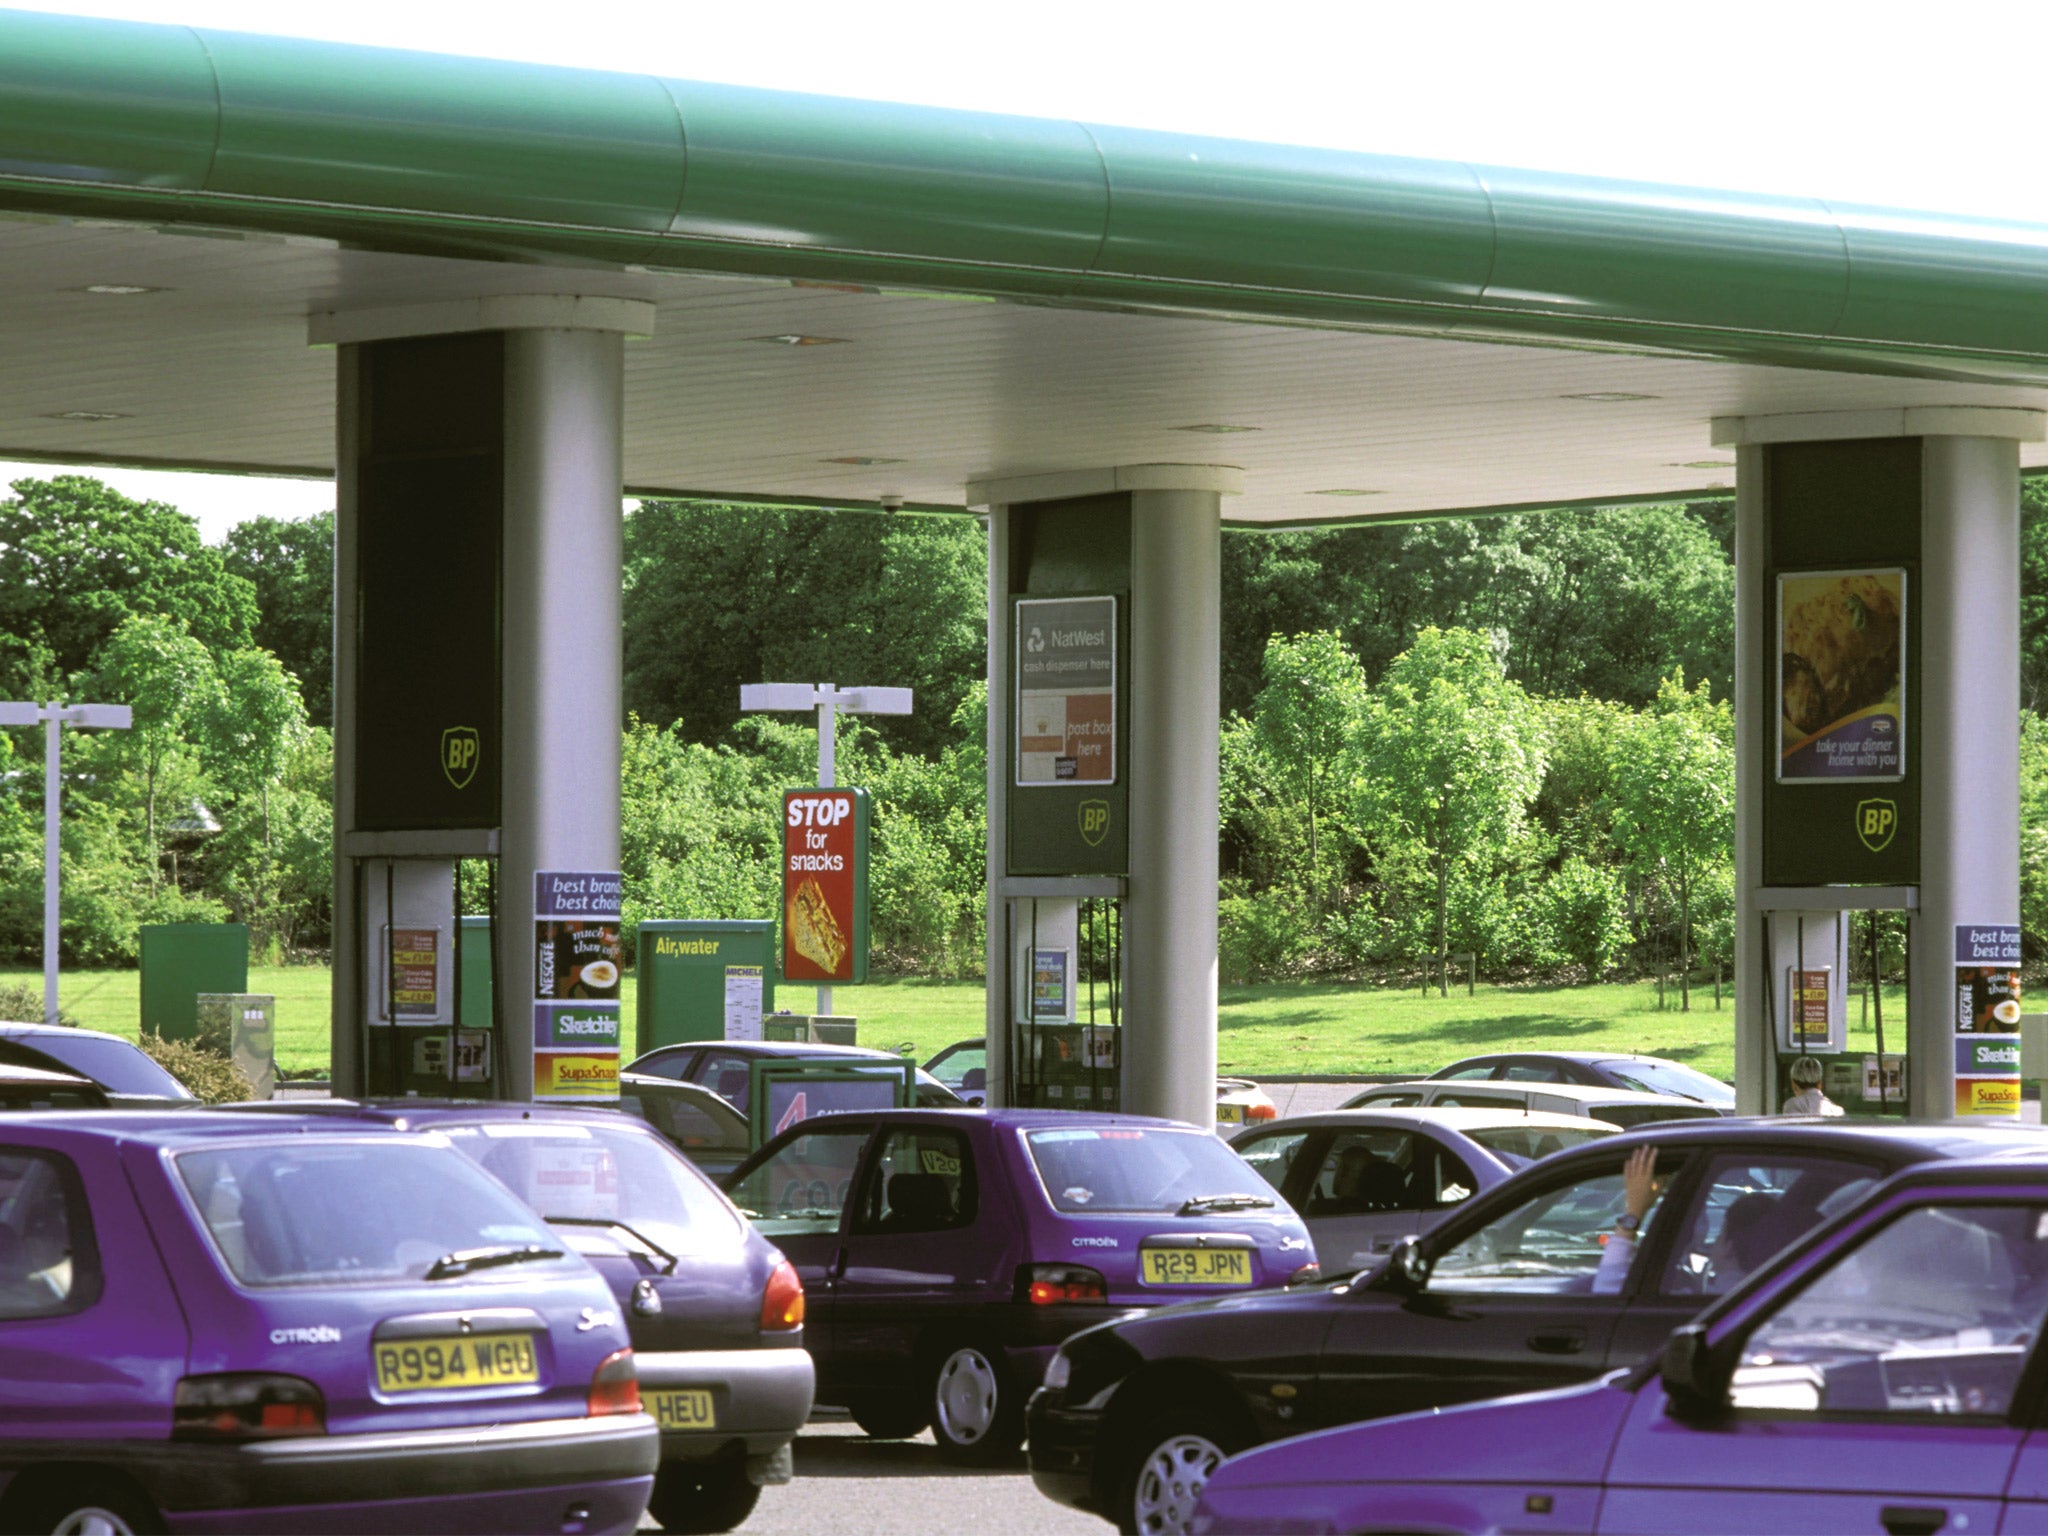 Motorway signs displaying fuel prices for upcoming services could soon be commonplace, allowing drivers to compare them and make an informed choice